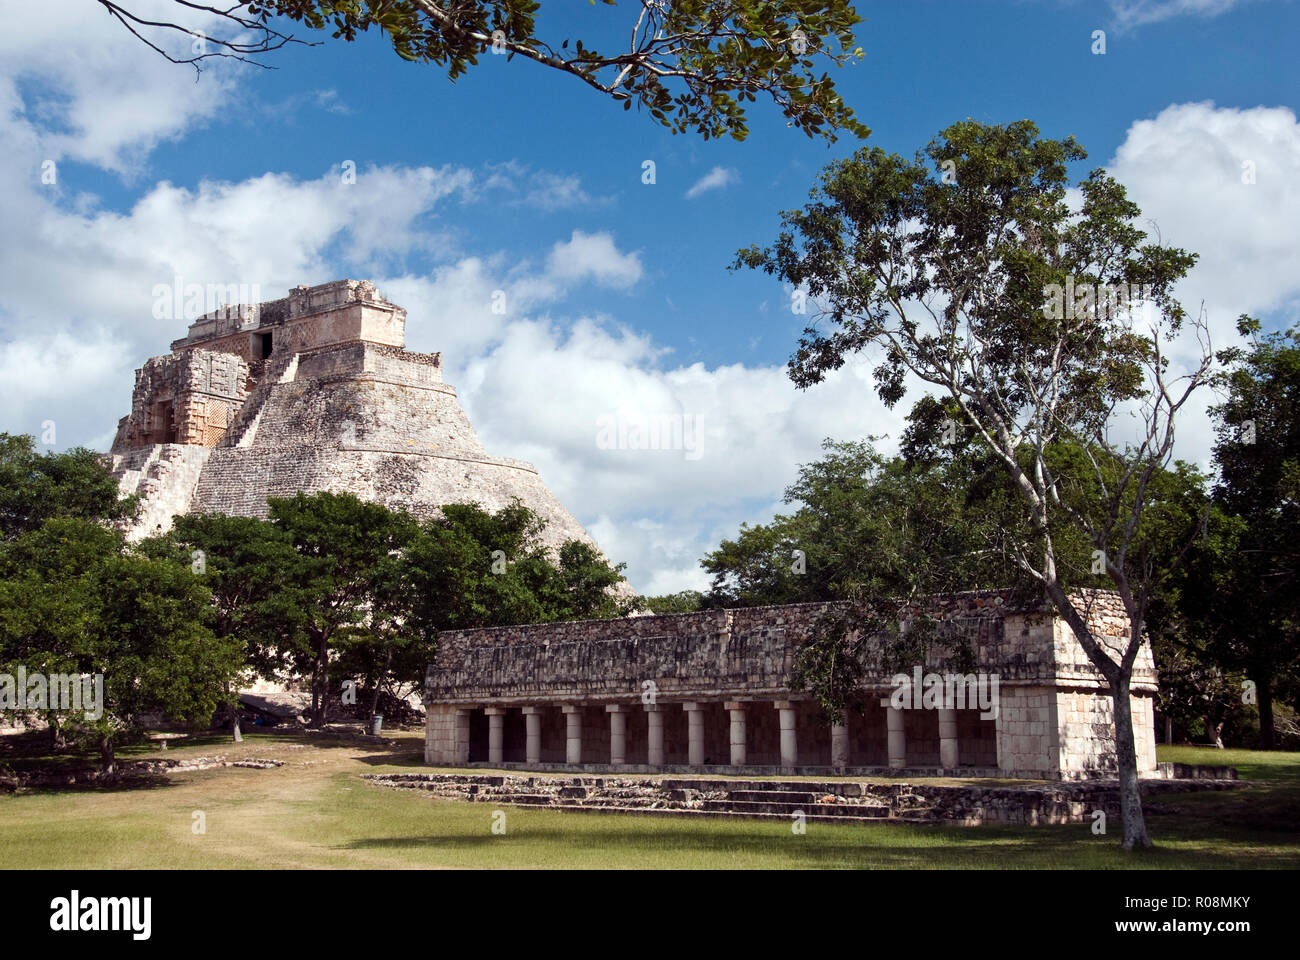 The Pyramid of the Magician (Piramide del Adivino) and a small, courtyard building in the Mayan city of Uxmal, Mexico. Stock Photo